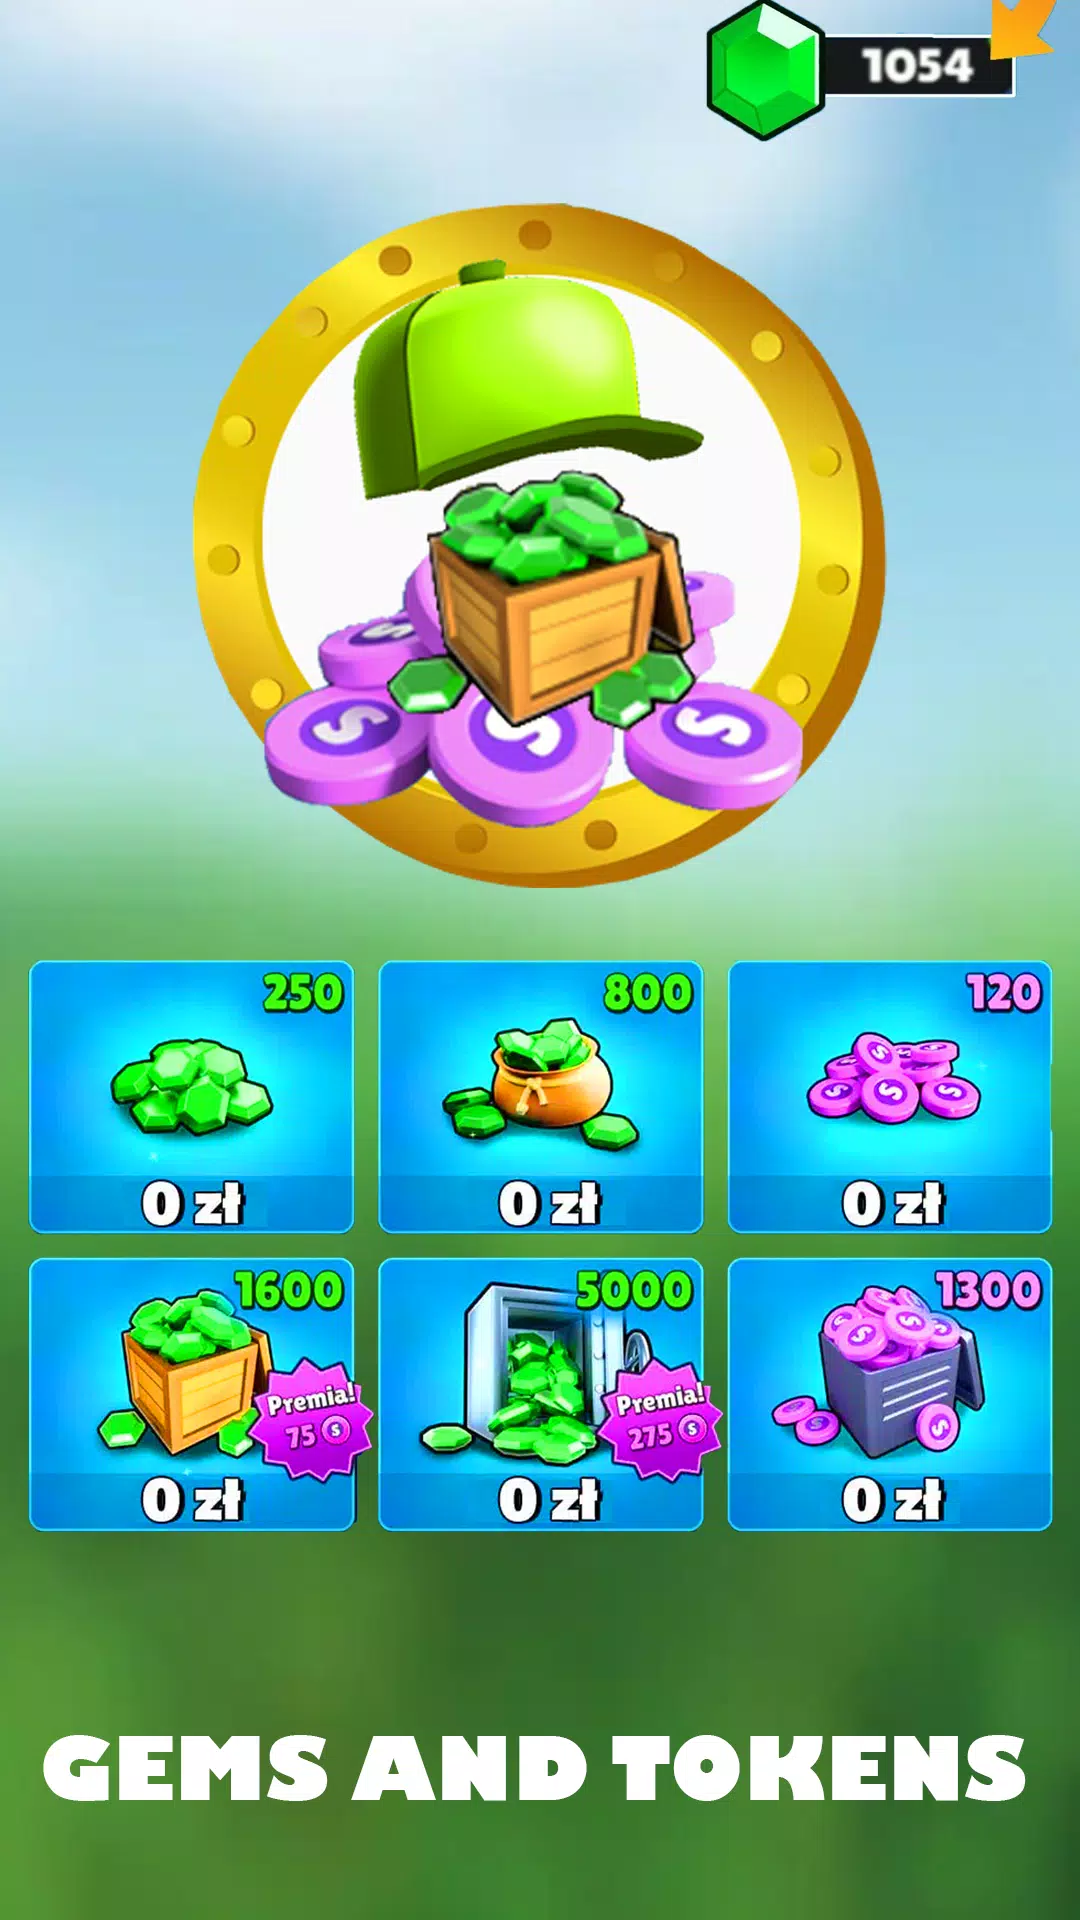 How to get free gems in Stumble Guys